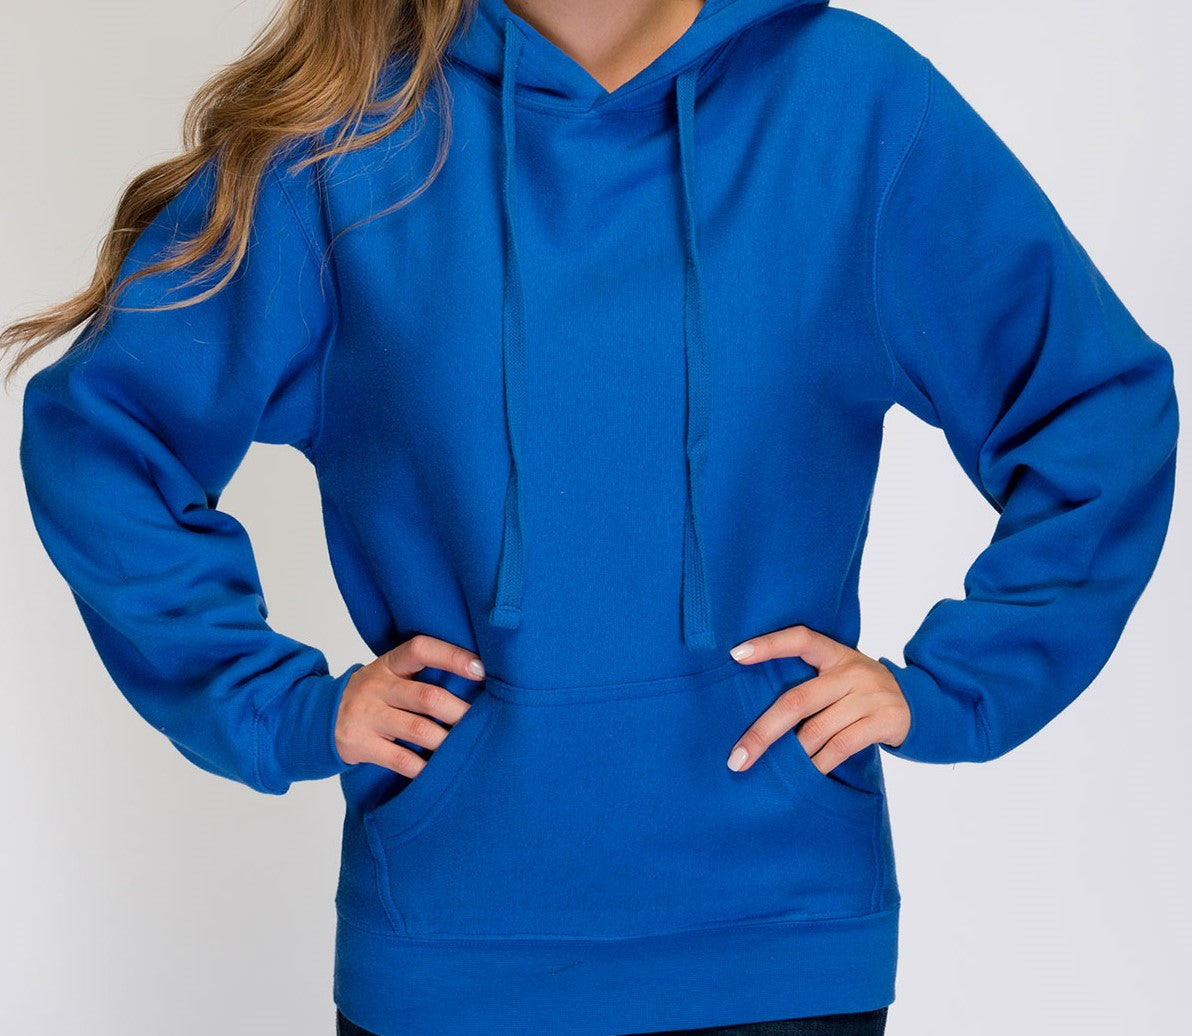 Adult Hoodies Mid Weight Promo